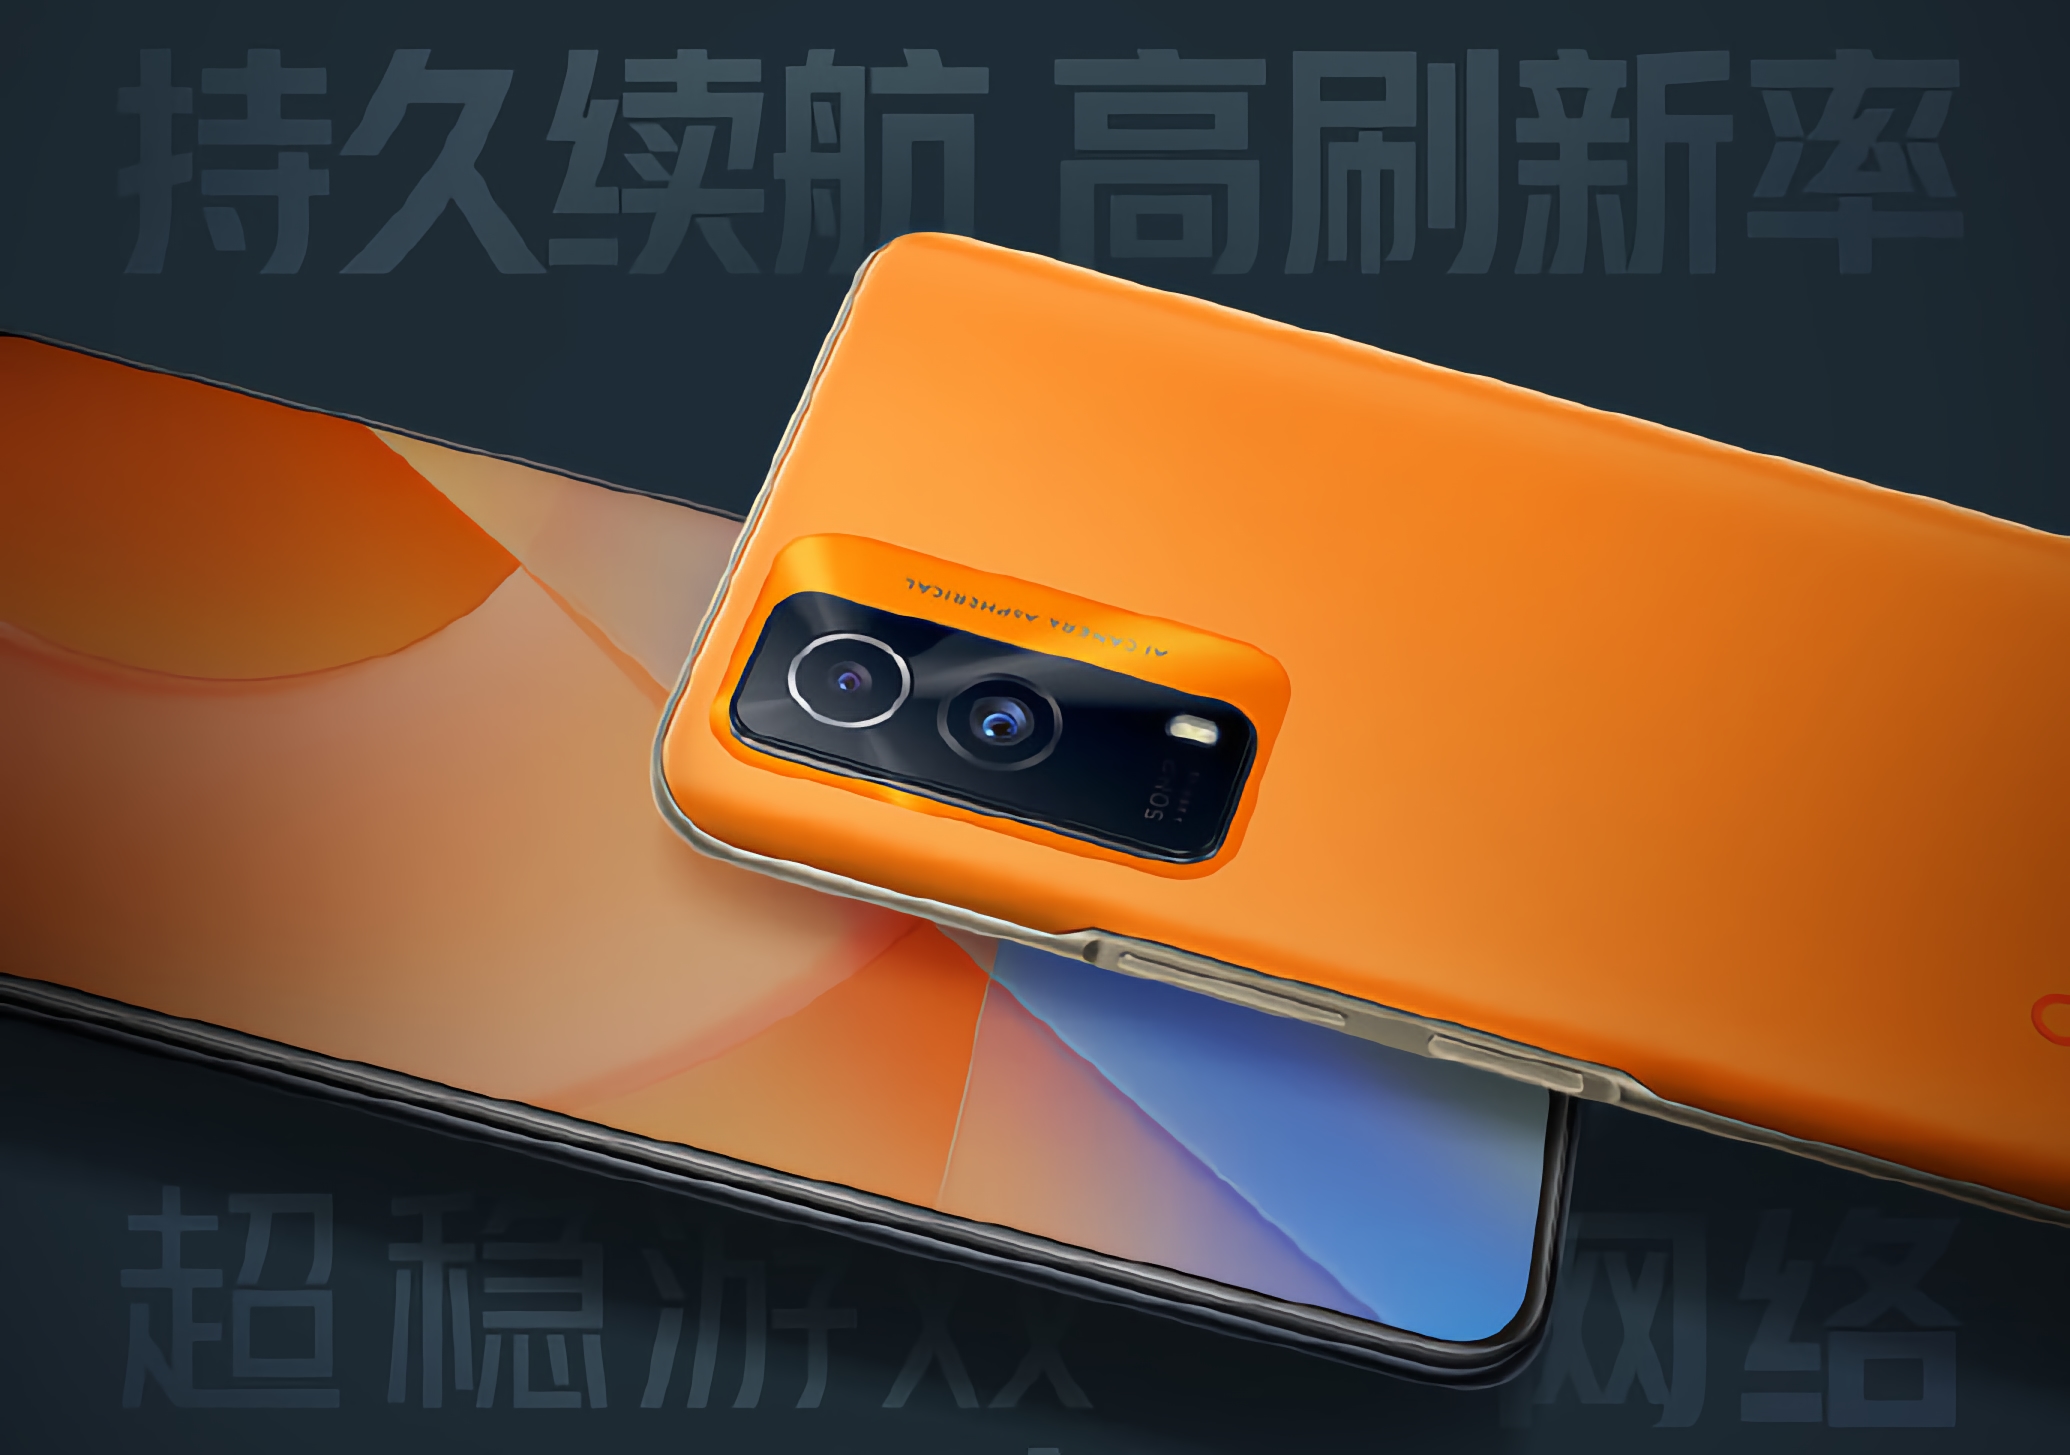 Vivo will unveil the iQOO Z5x smartphone with a MediaTek Dimensity 900 processor on board and a 50 MP camera on October 20